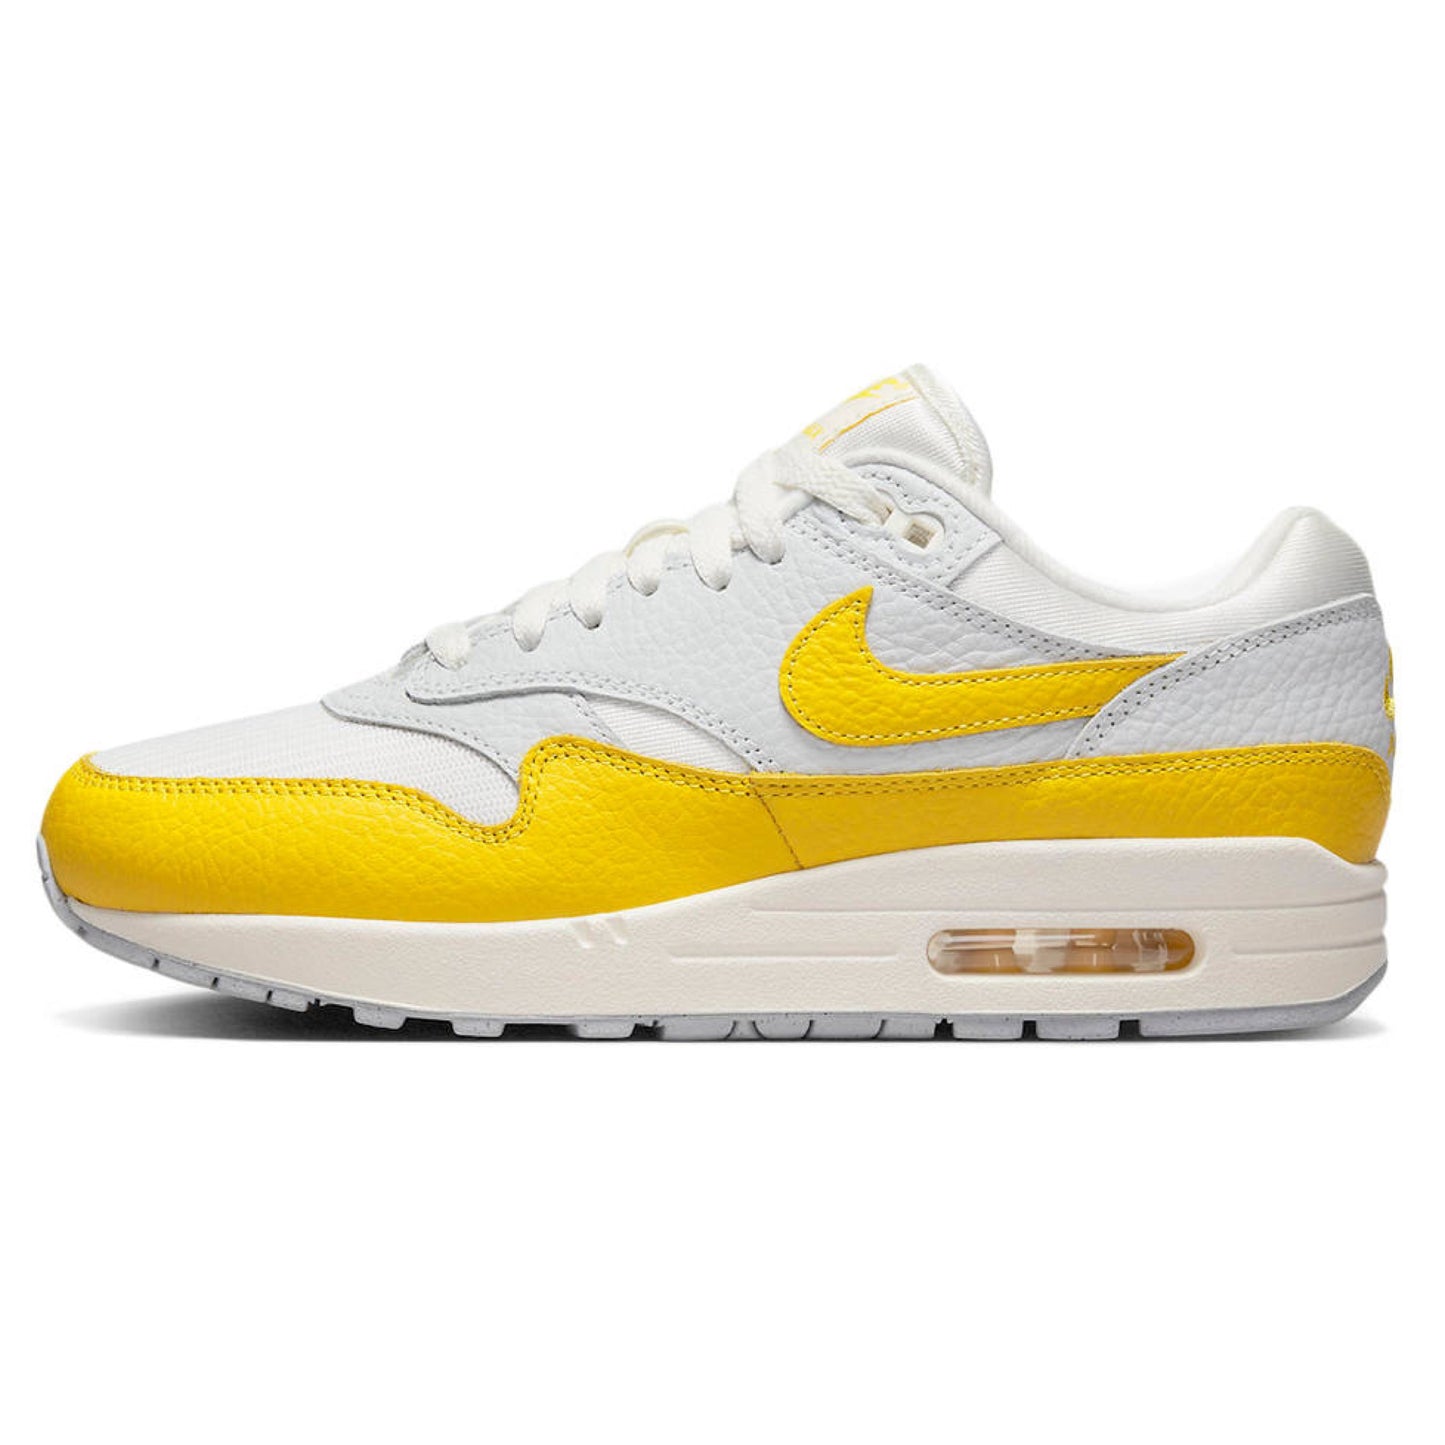 Contrast Clothing Worthing Nike AIR MAX ! TOUR YELLOW sneakers